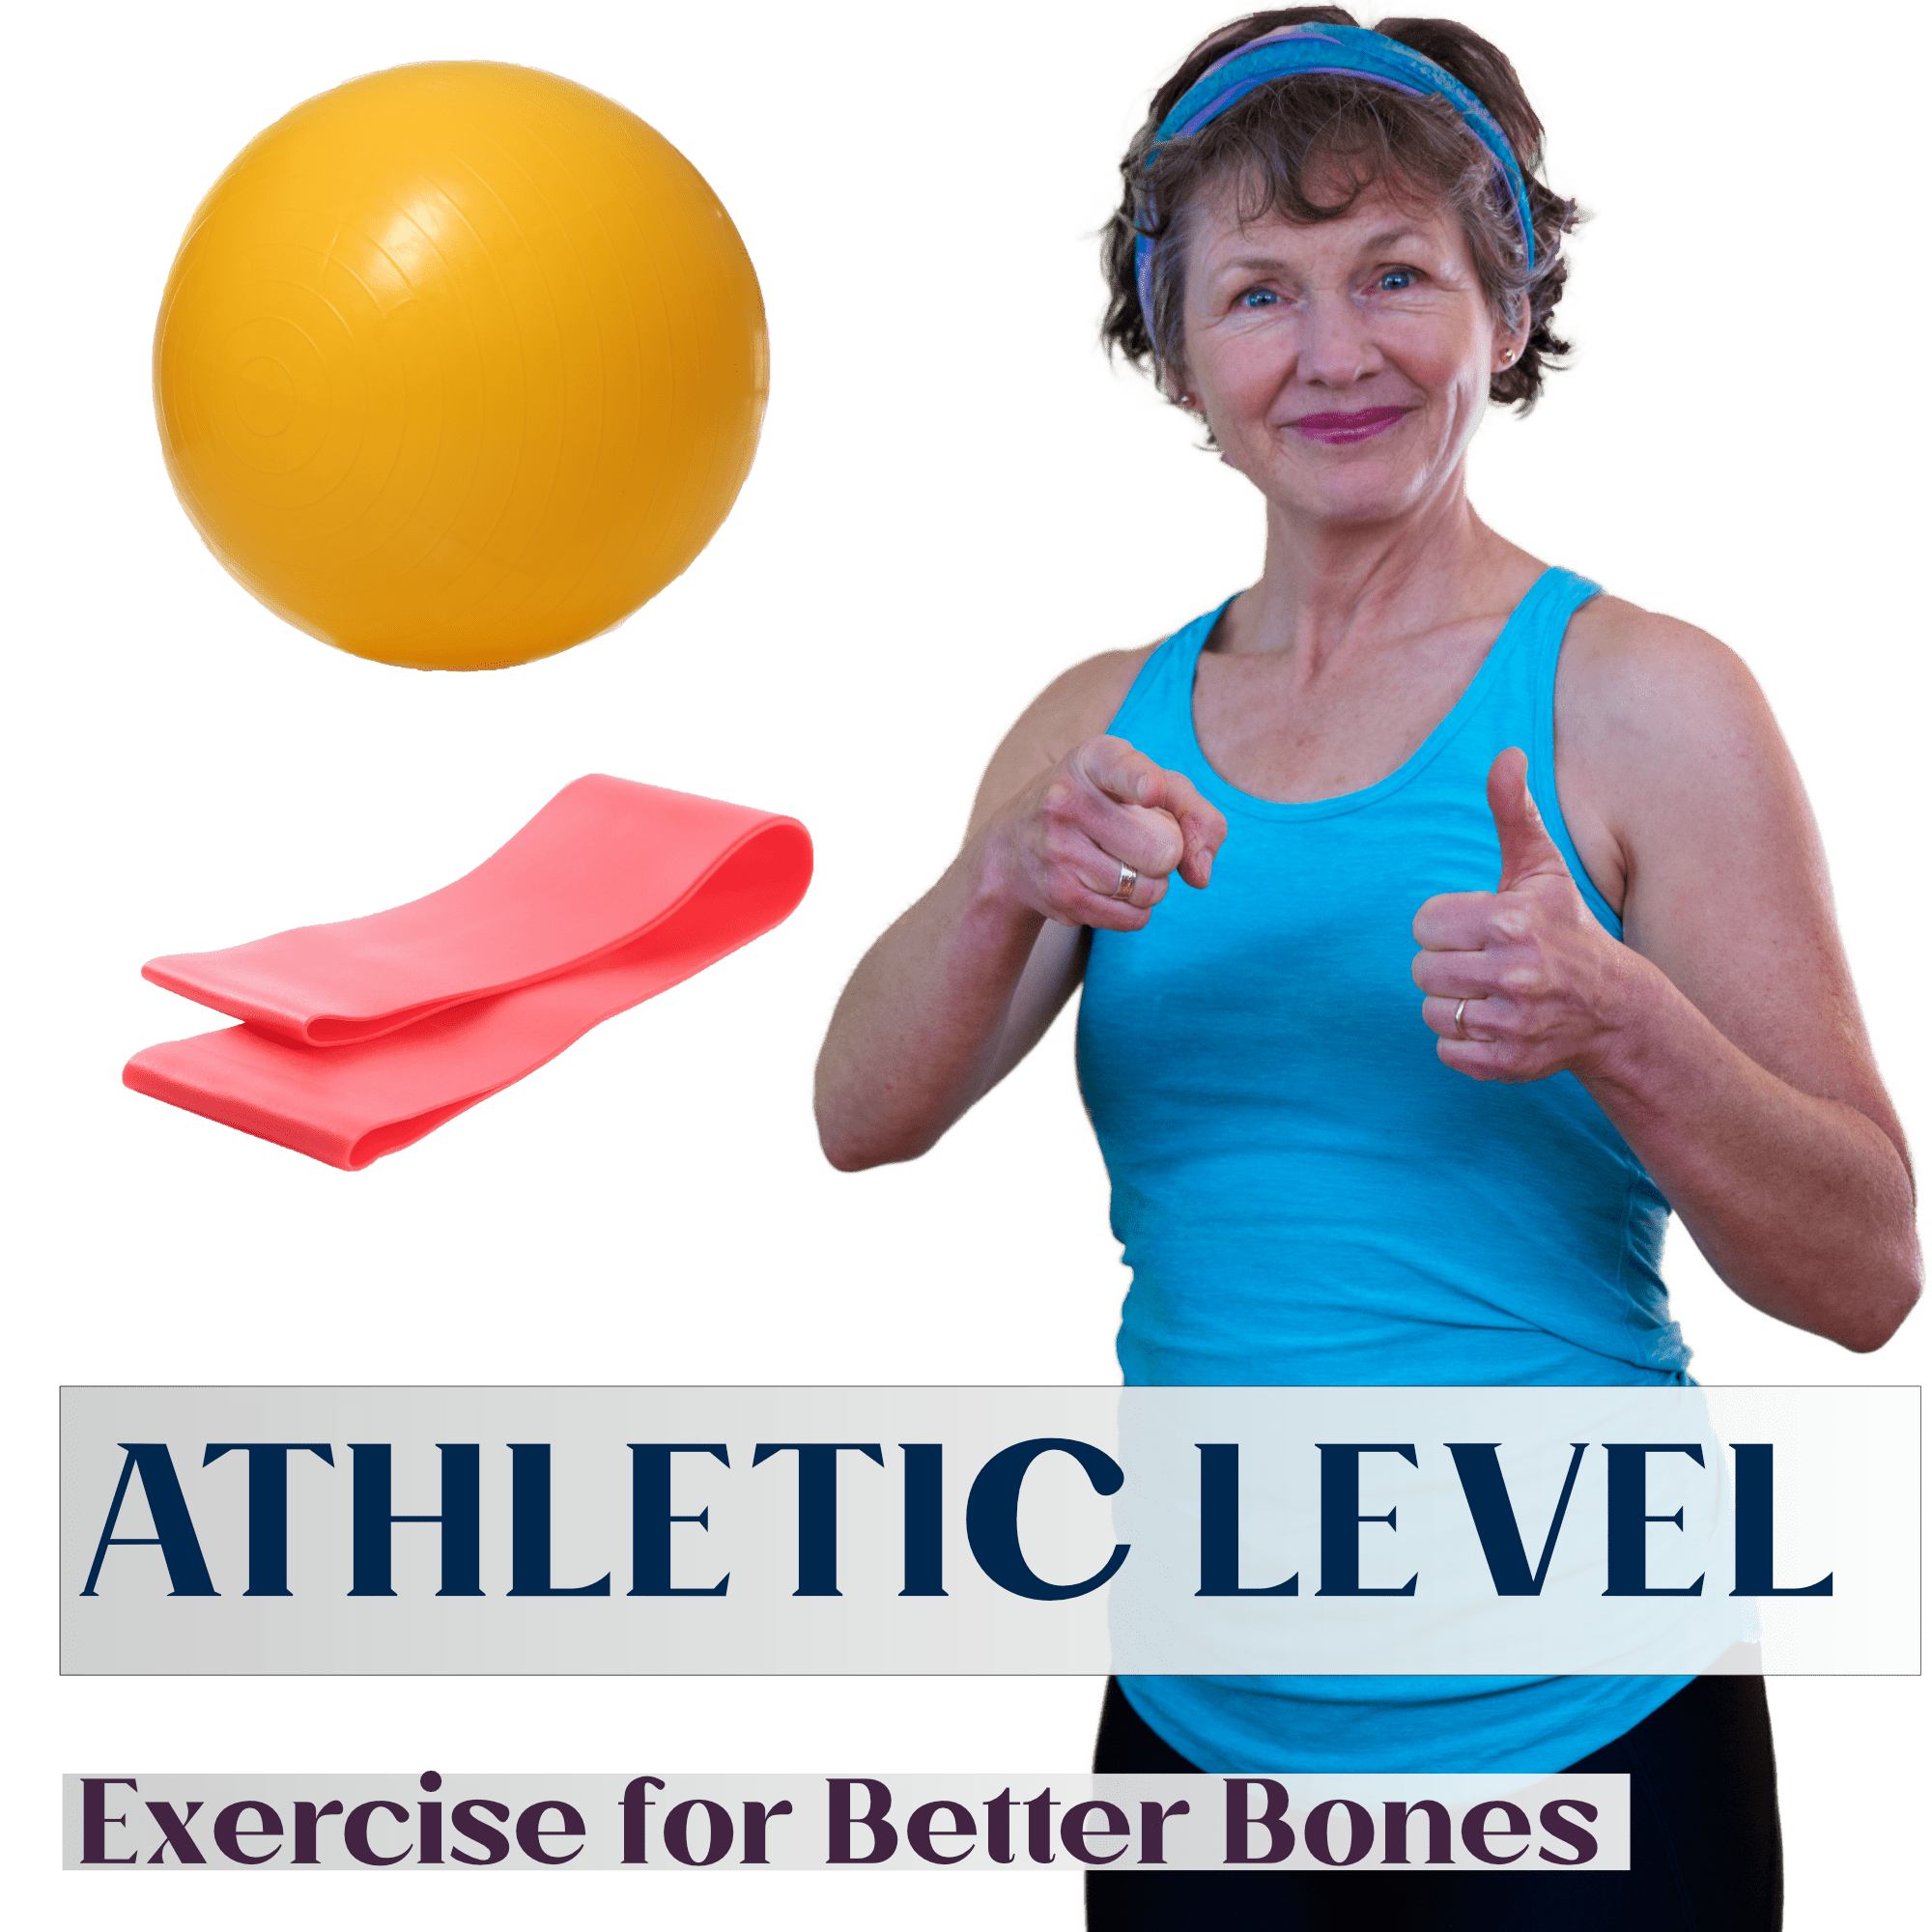 osteoporosis exercise equipment for athletic